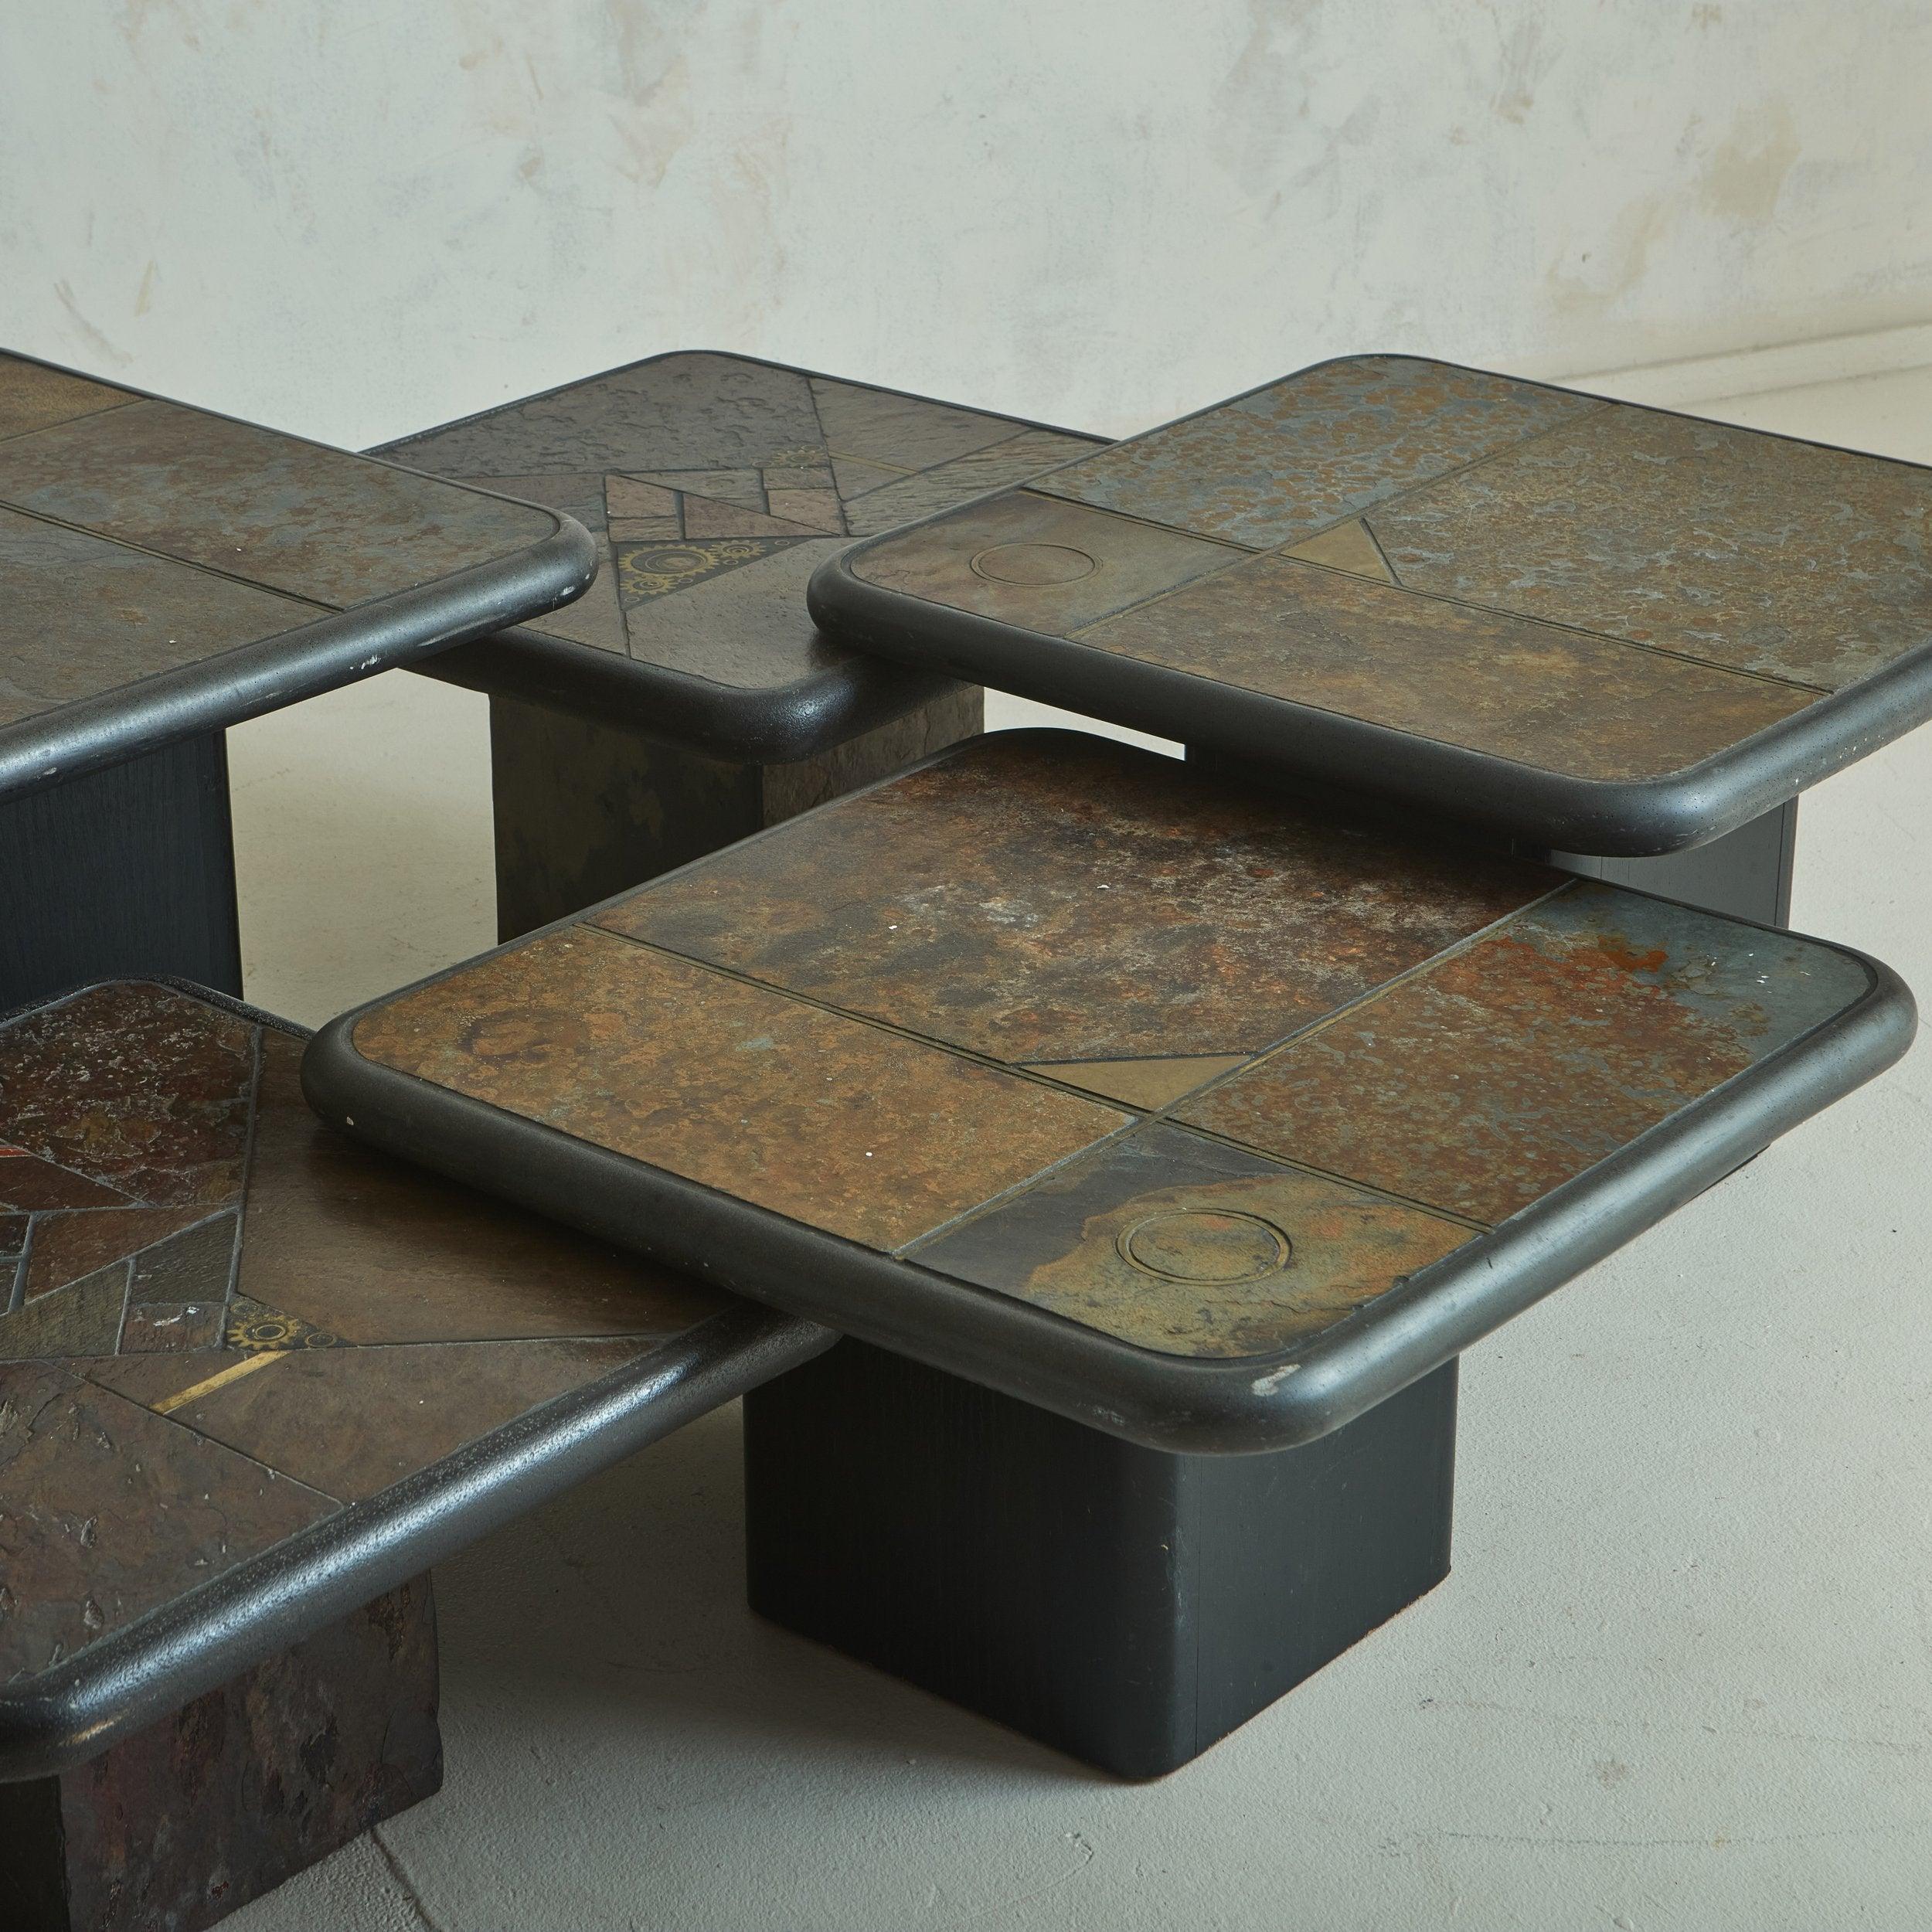 Scandinavian Modern Trio of Nesting Mosaic Coffee Tables with Metal Bases by Paul Kingma, Dutch For Sale